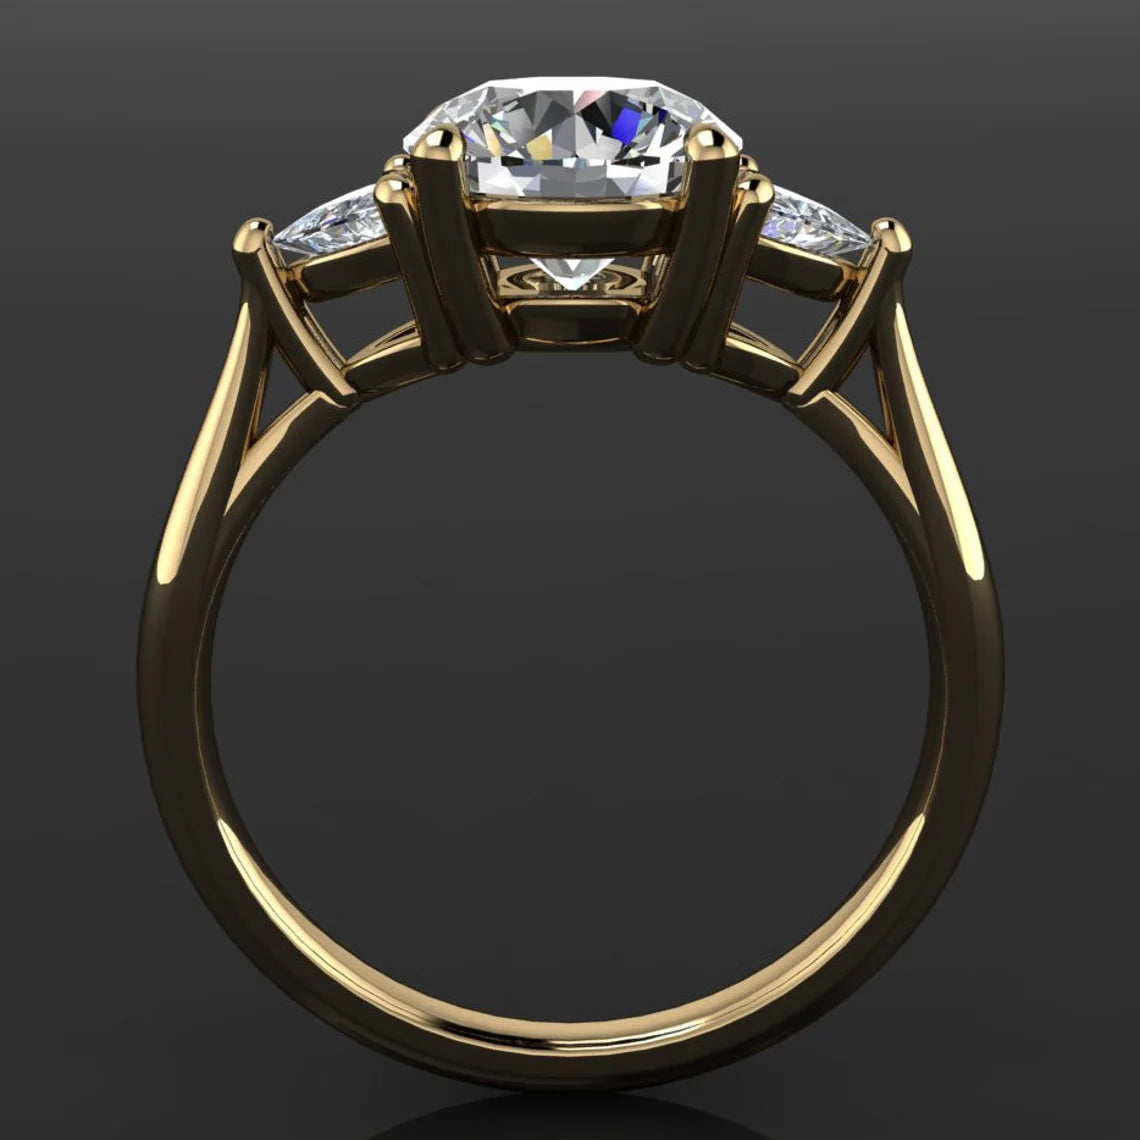 amelie ring - 1.5 carat round NEO moissanite engagement ring, anniversary ring - J Hollywood Designs